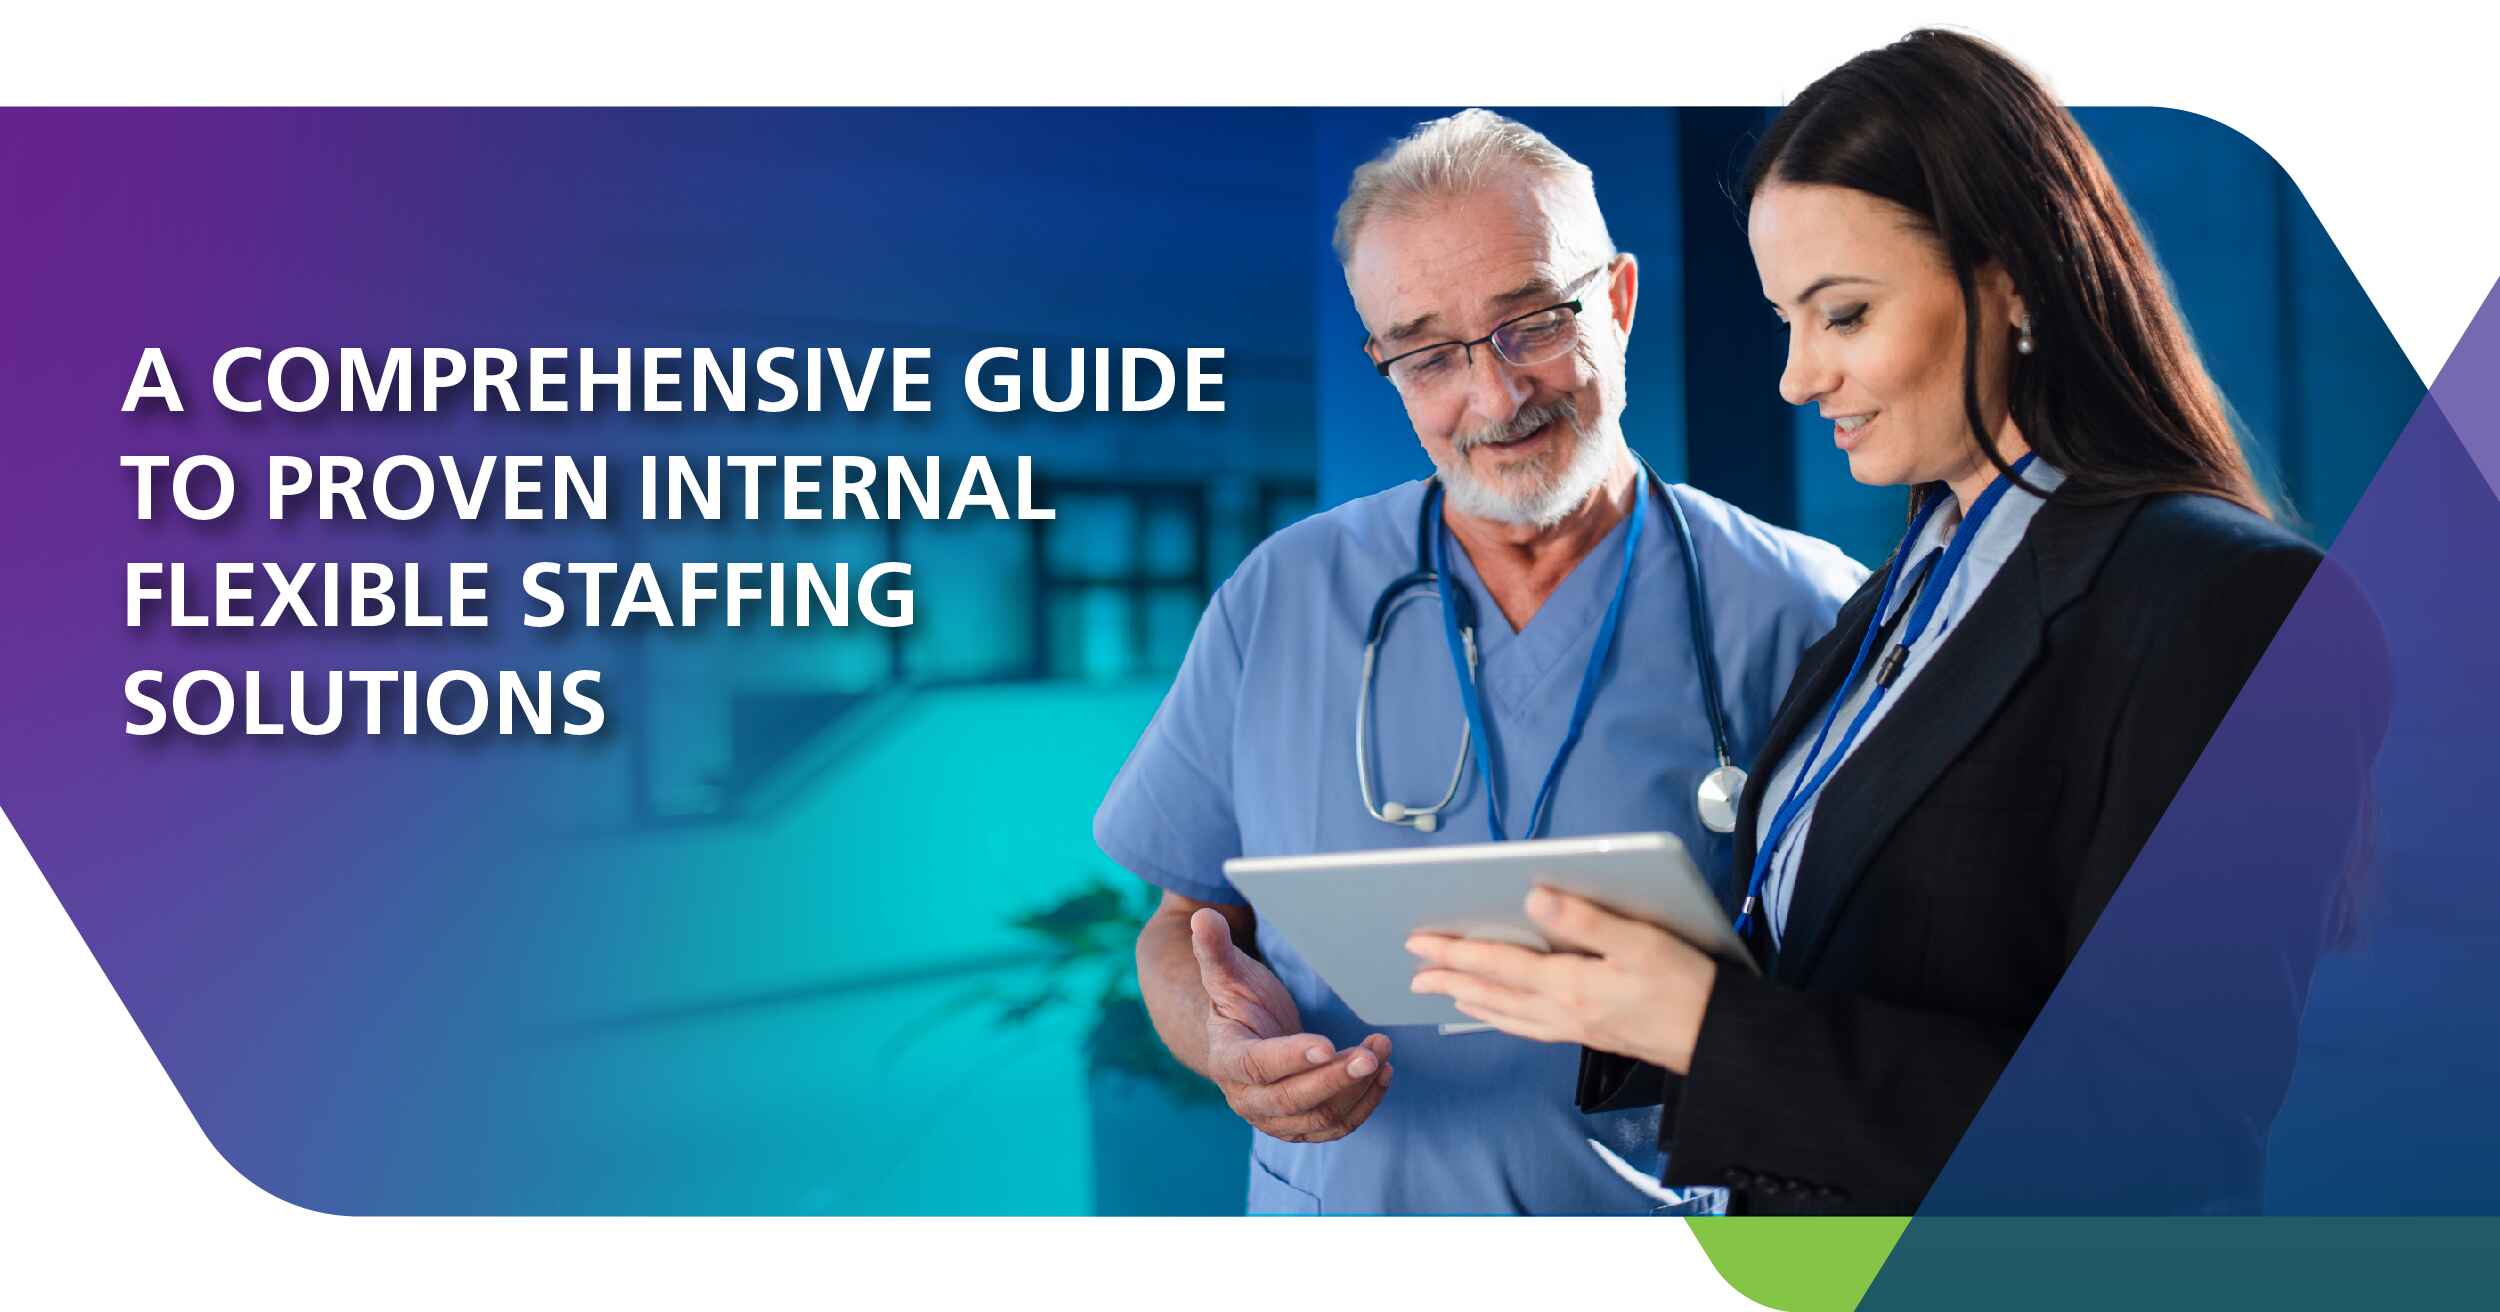 A comprehensive guide to health and fitness staffing